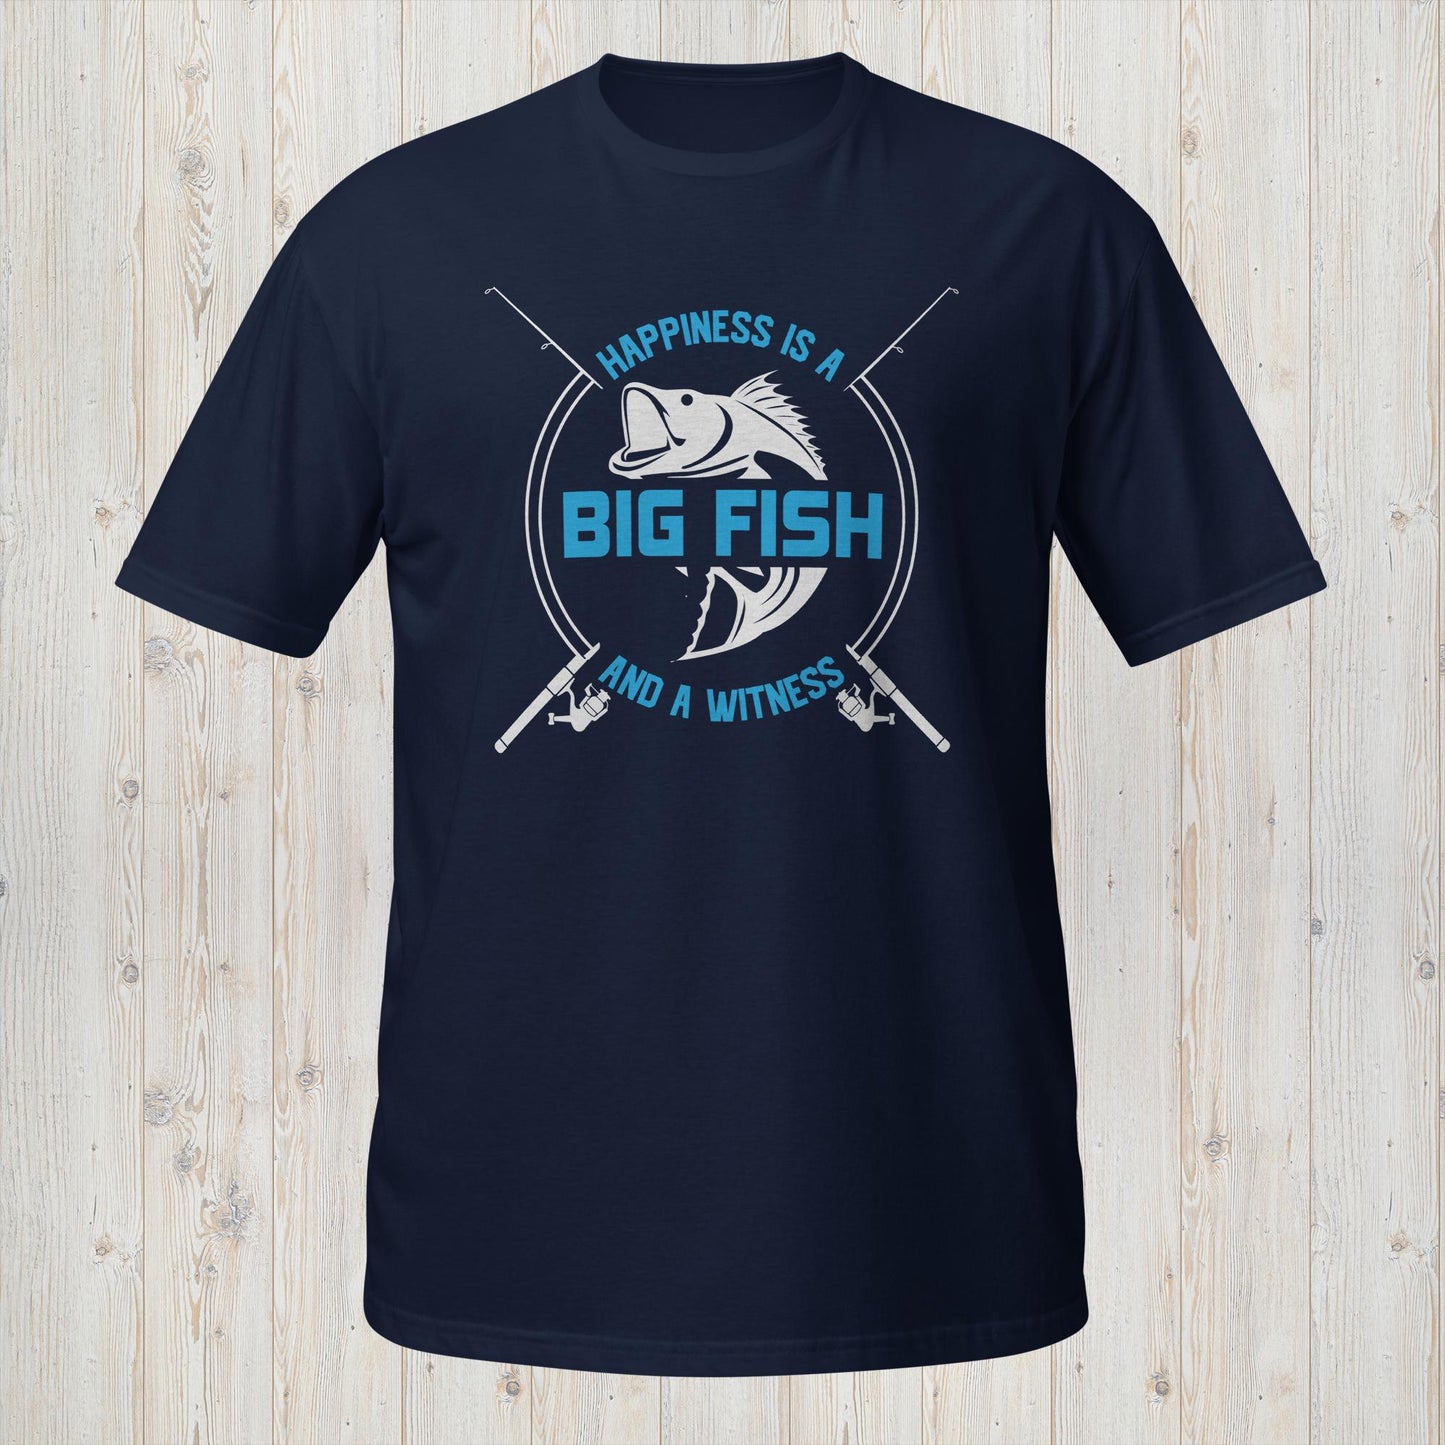 Happiness is a Big Fish and a Witness Tee - Fishing Enthusiast Shirt